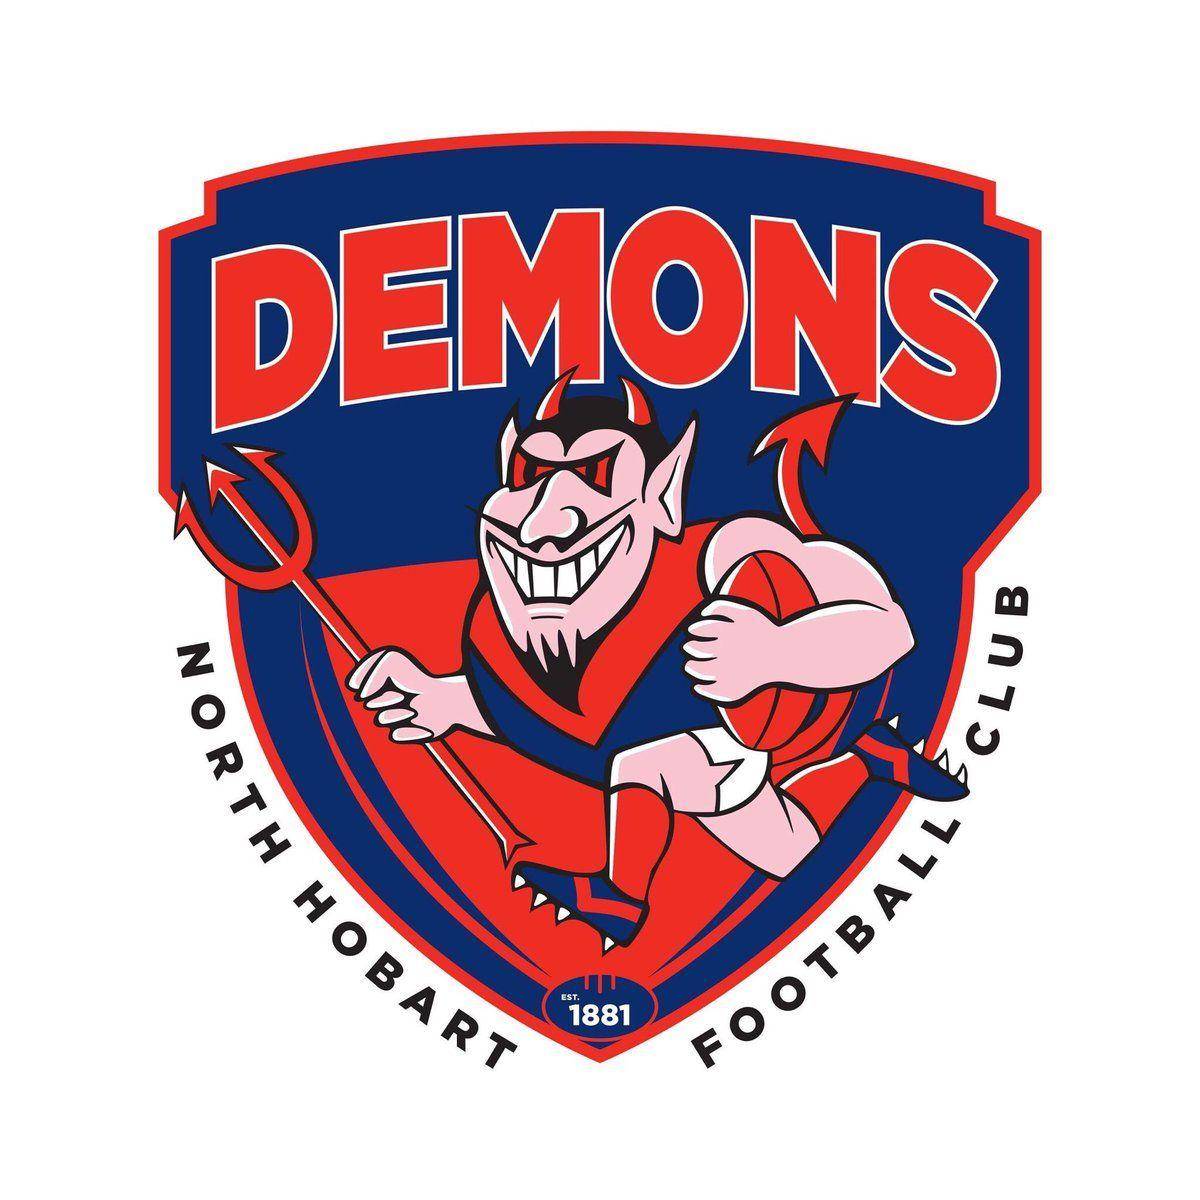 Hobart Logo - North Hobart Demons our new club logo! Our